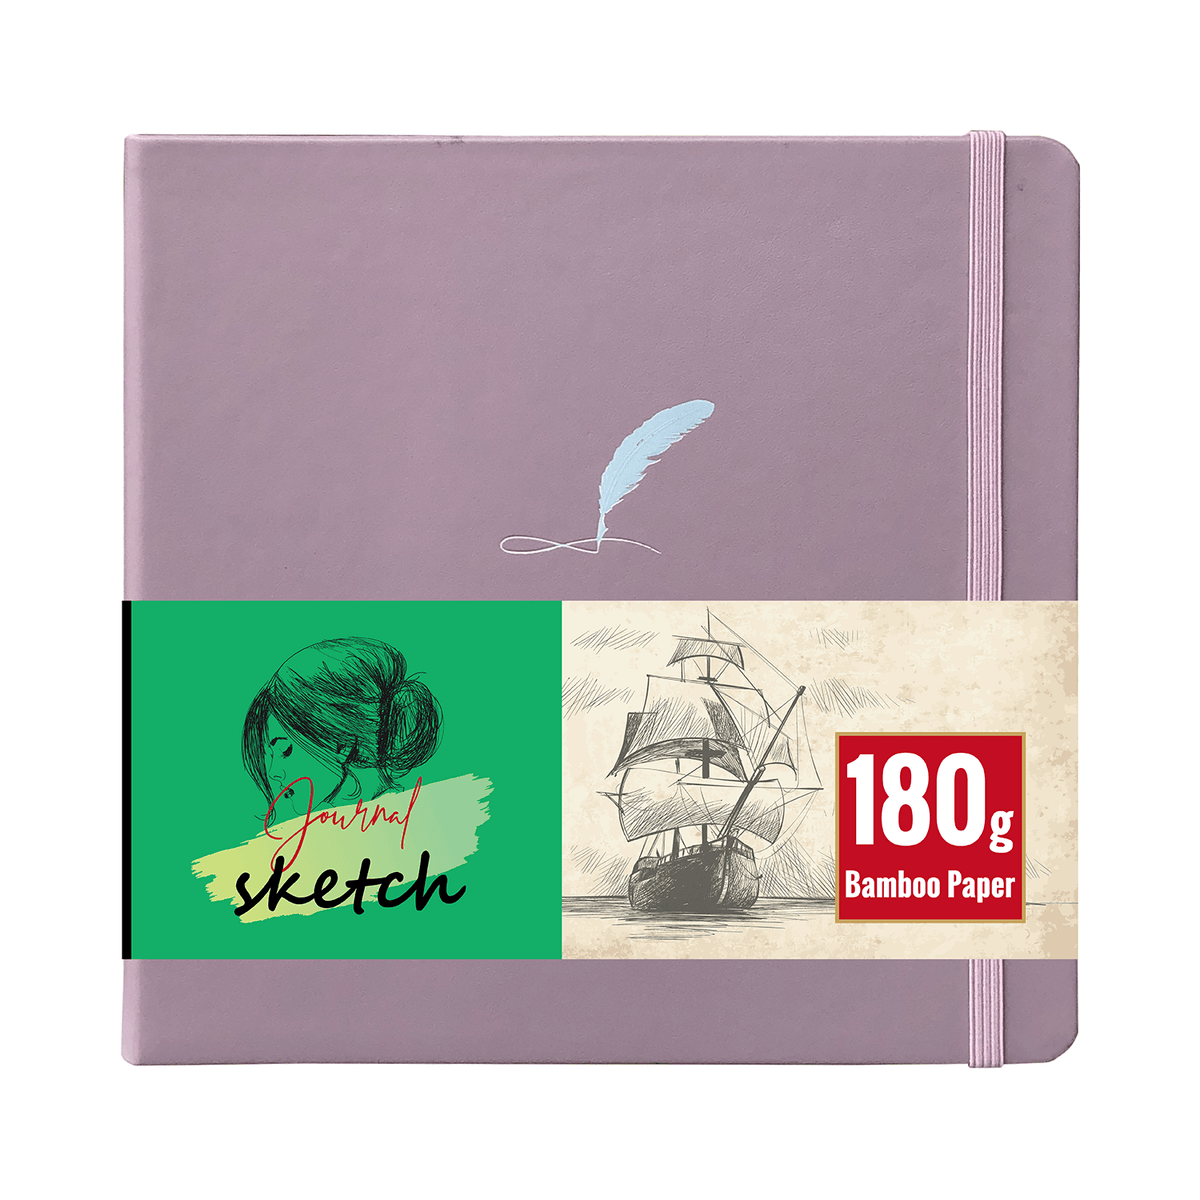 Unique sketchbooks and notebooks made from old book covers 025